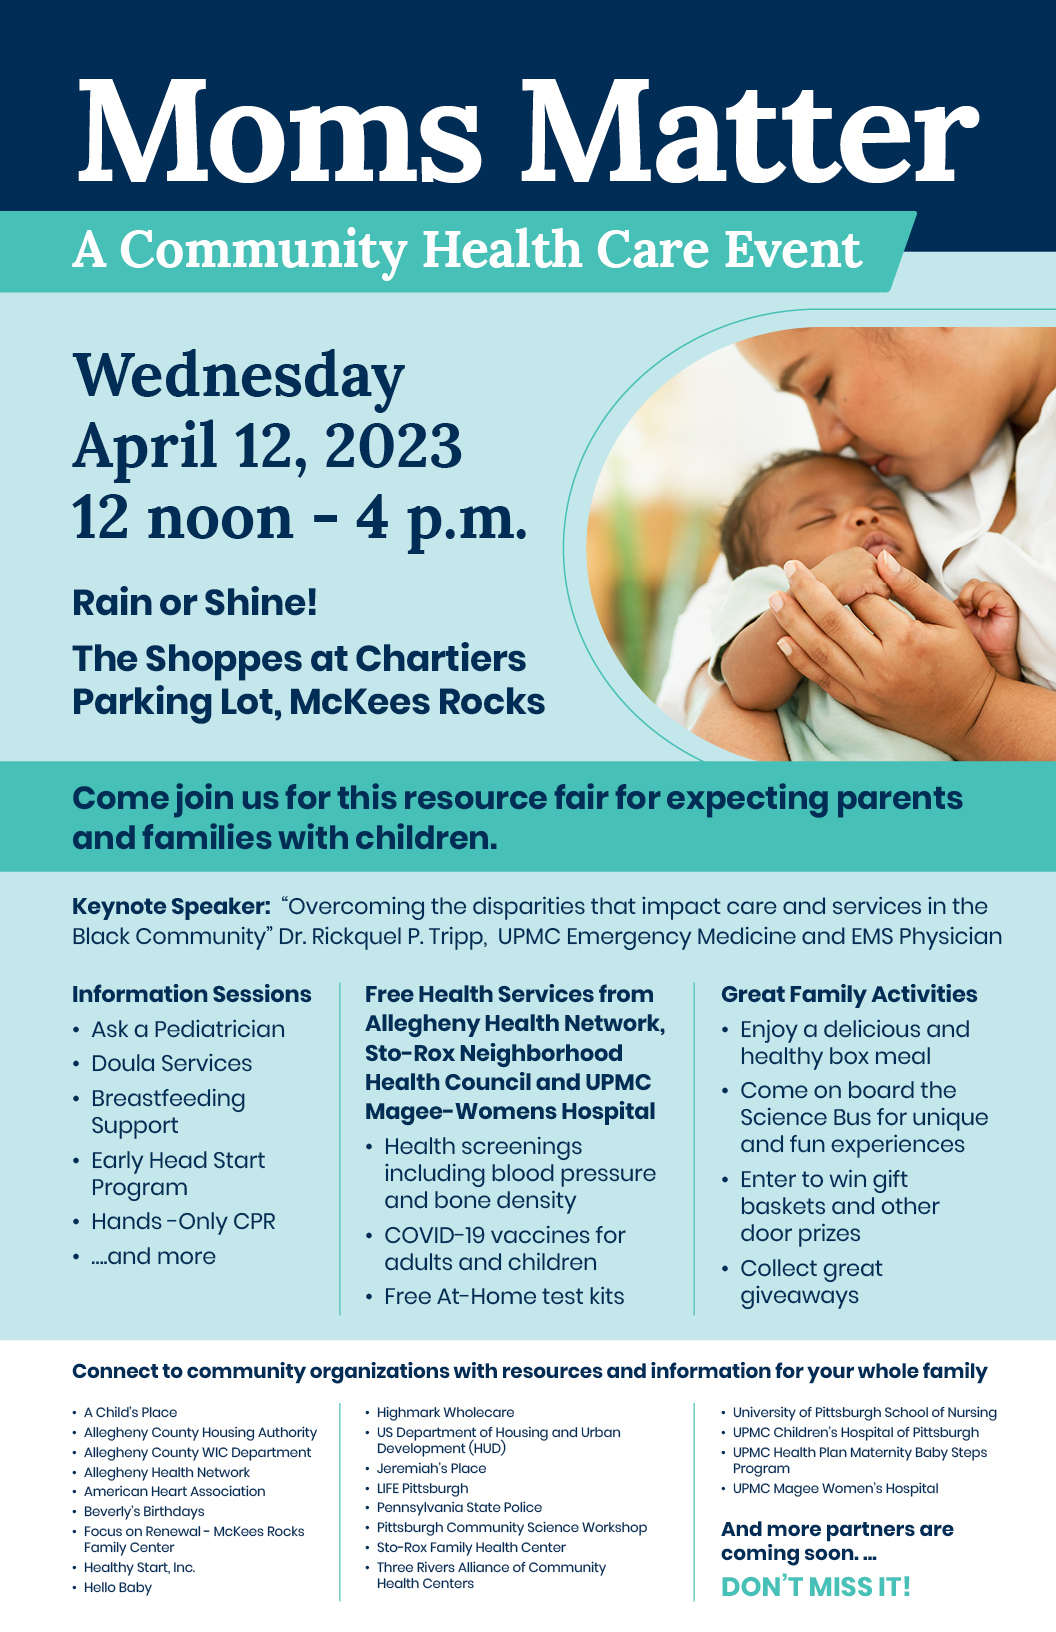 Moms Matter: Community Health Event & Resource Fair for families